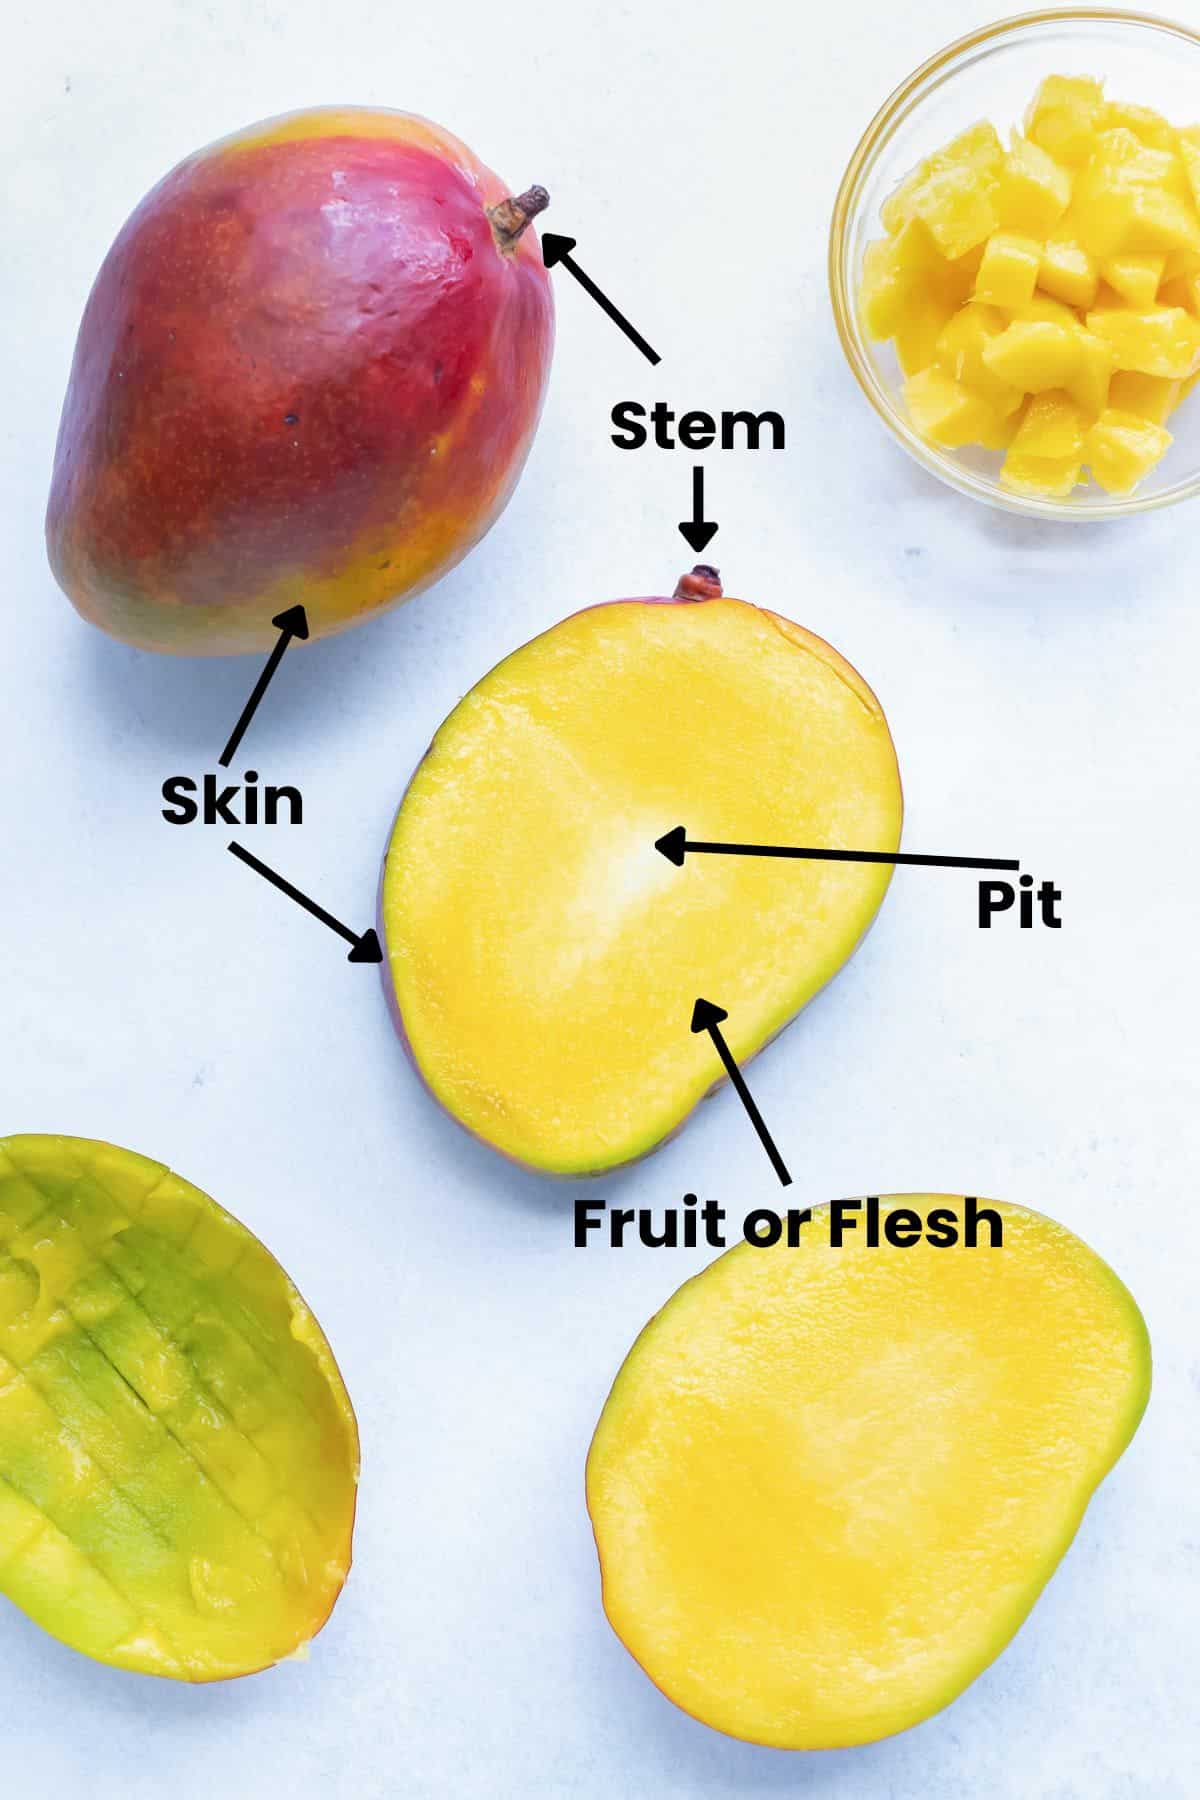 A drawing with arrows showing the oblong pit, peel or skin, flesh or fruit, and stem of mangoes.